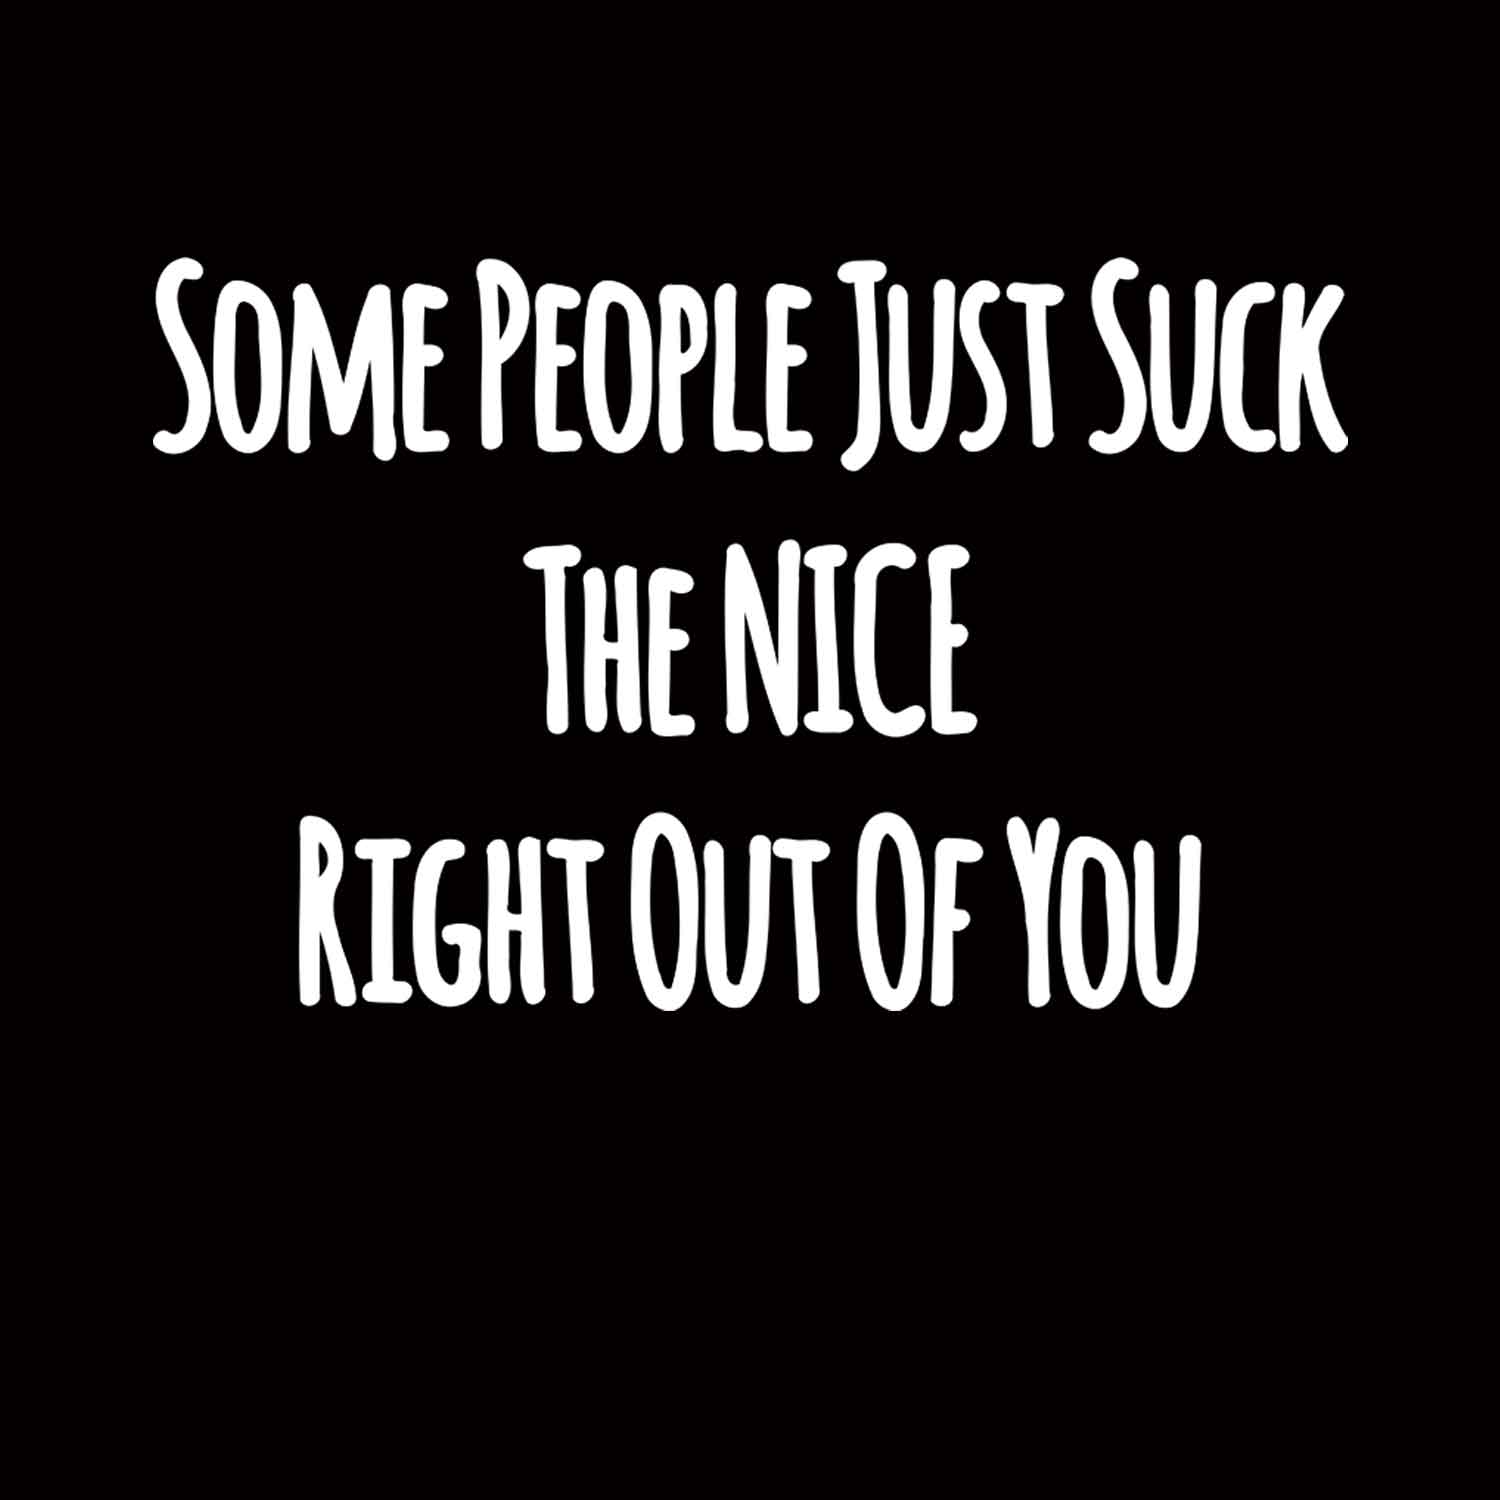 Some People Suck The Nice Right Out of You Printed T-Shirt-Black